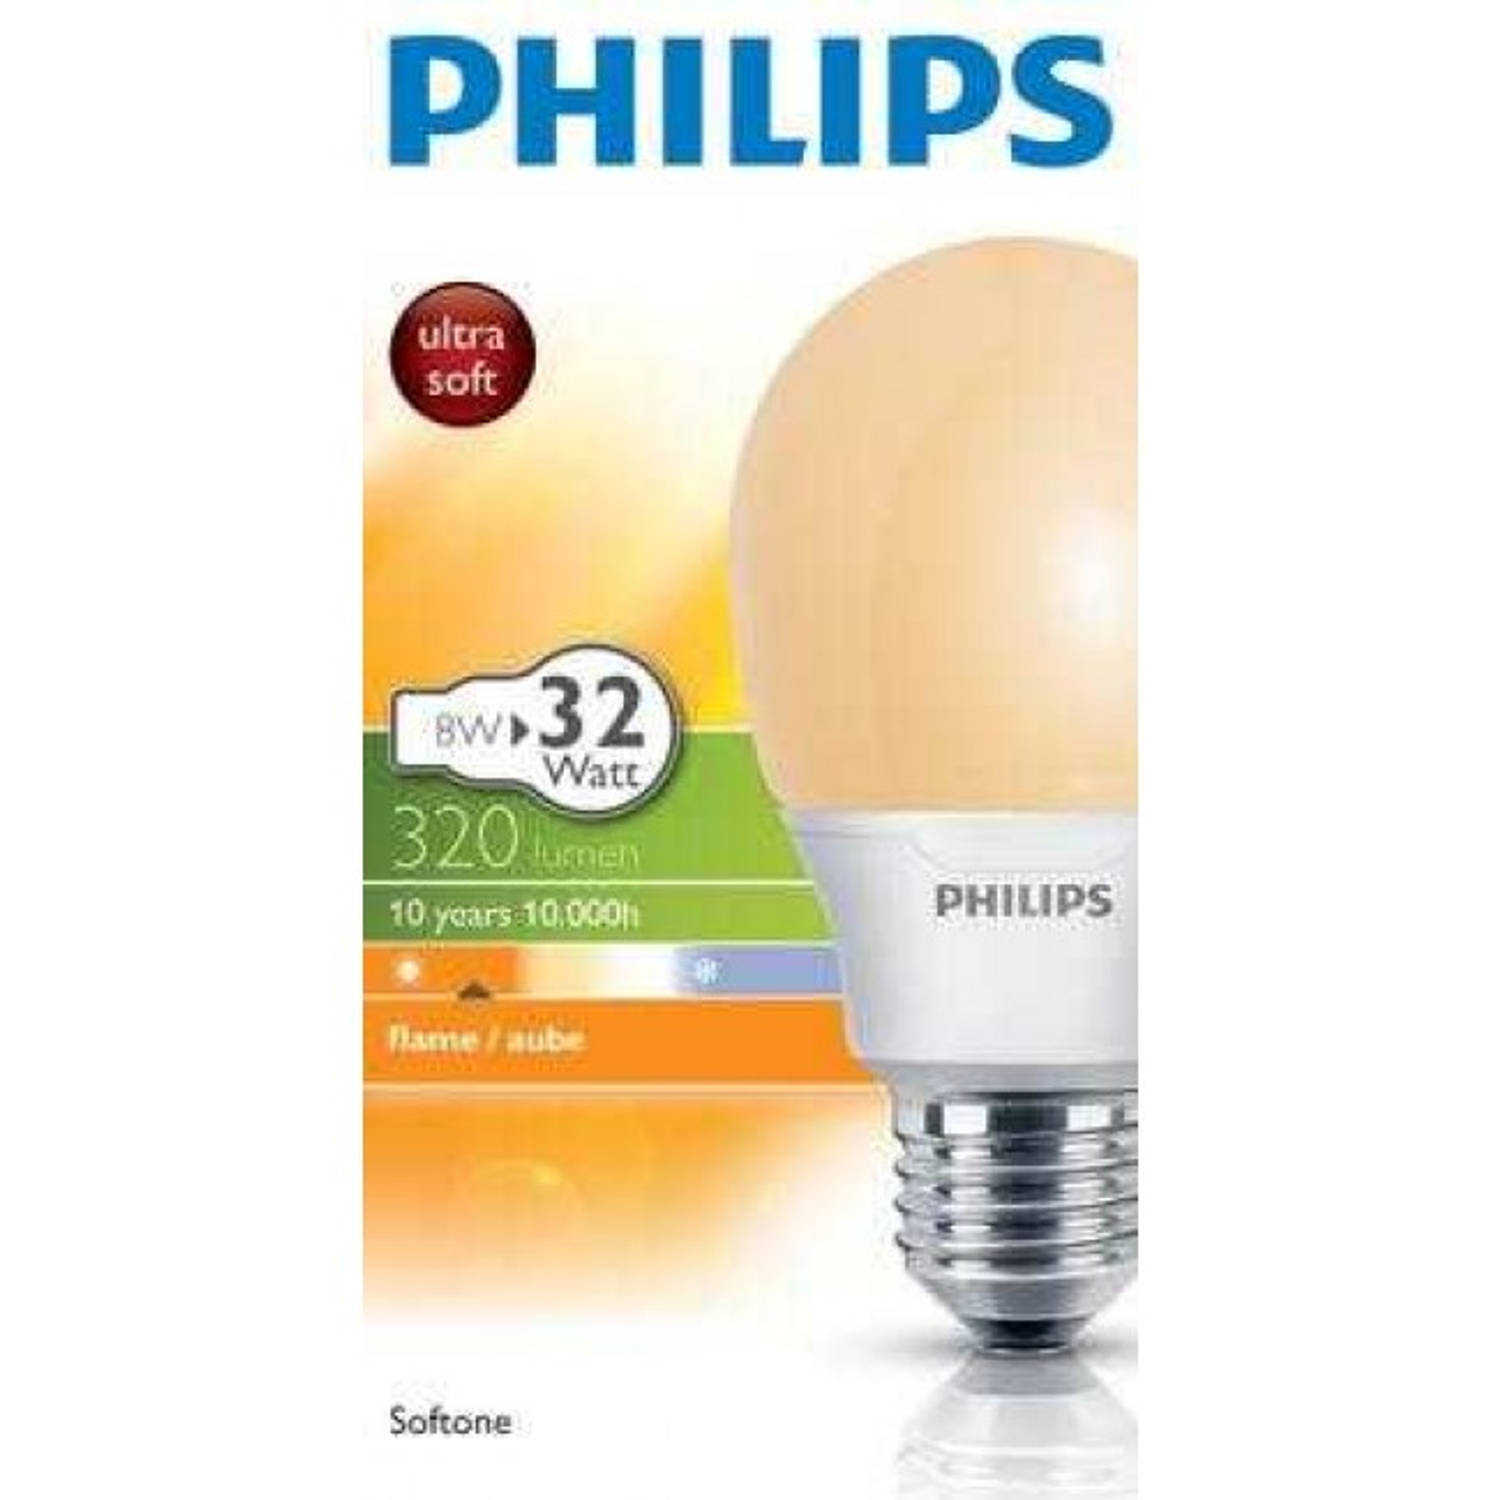 Philips Softone spaarlamp W E27 flame | Blokker